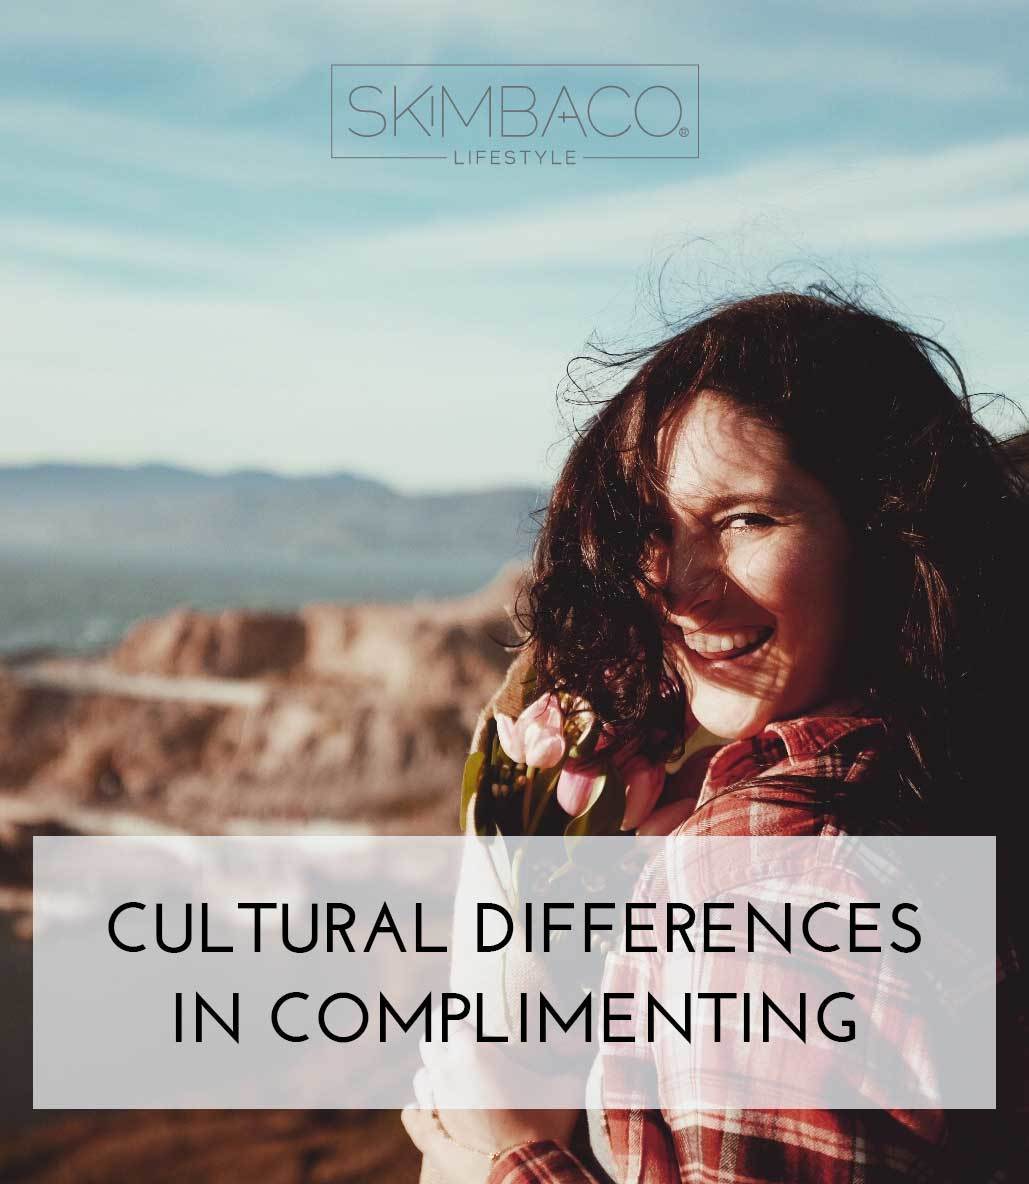 Cultural differences in complimenting